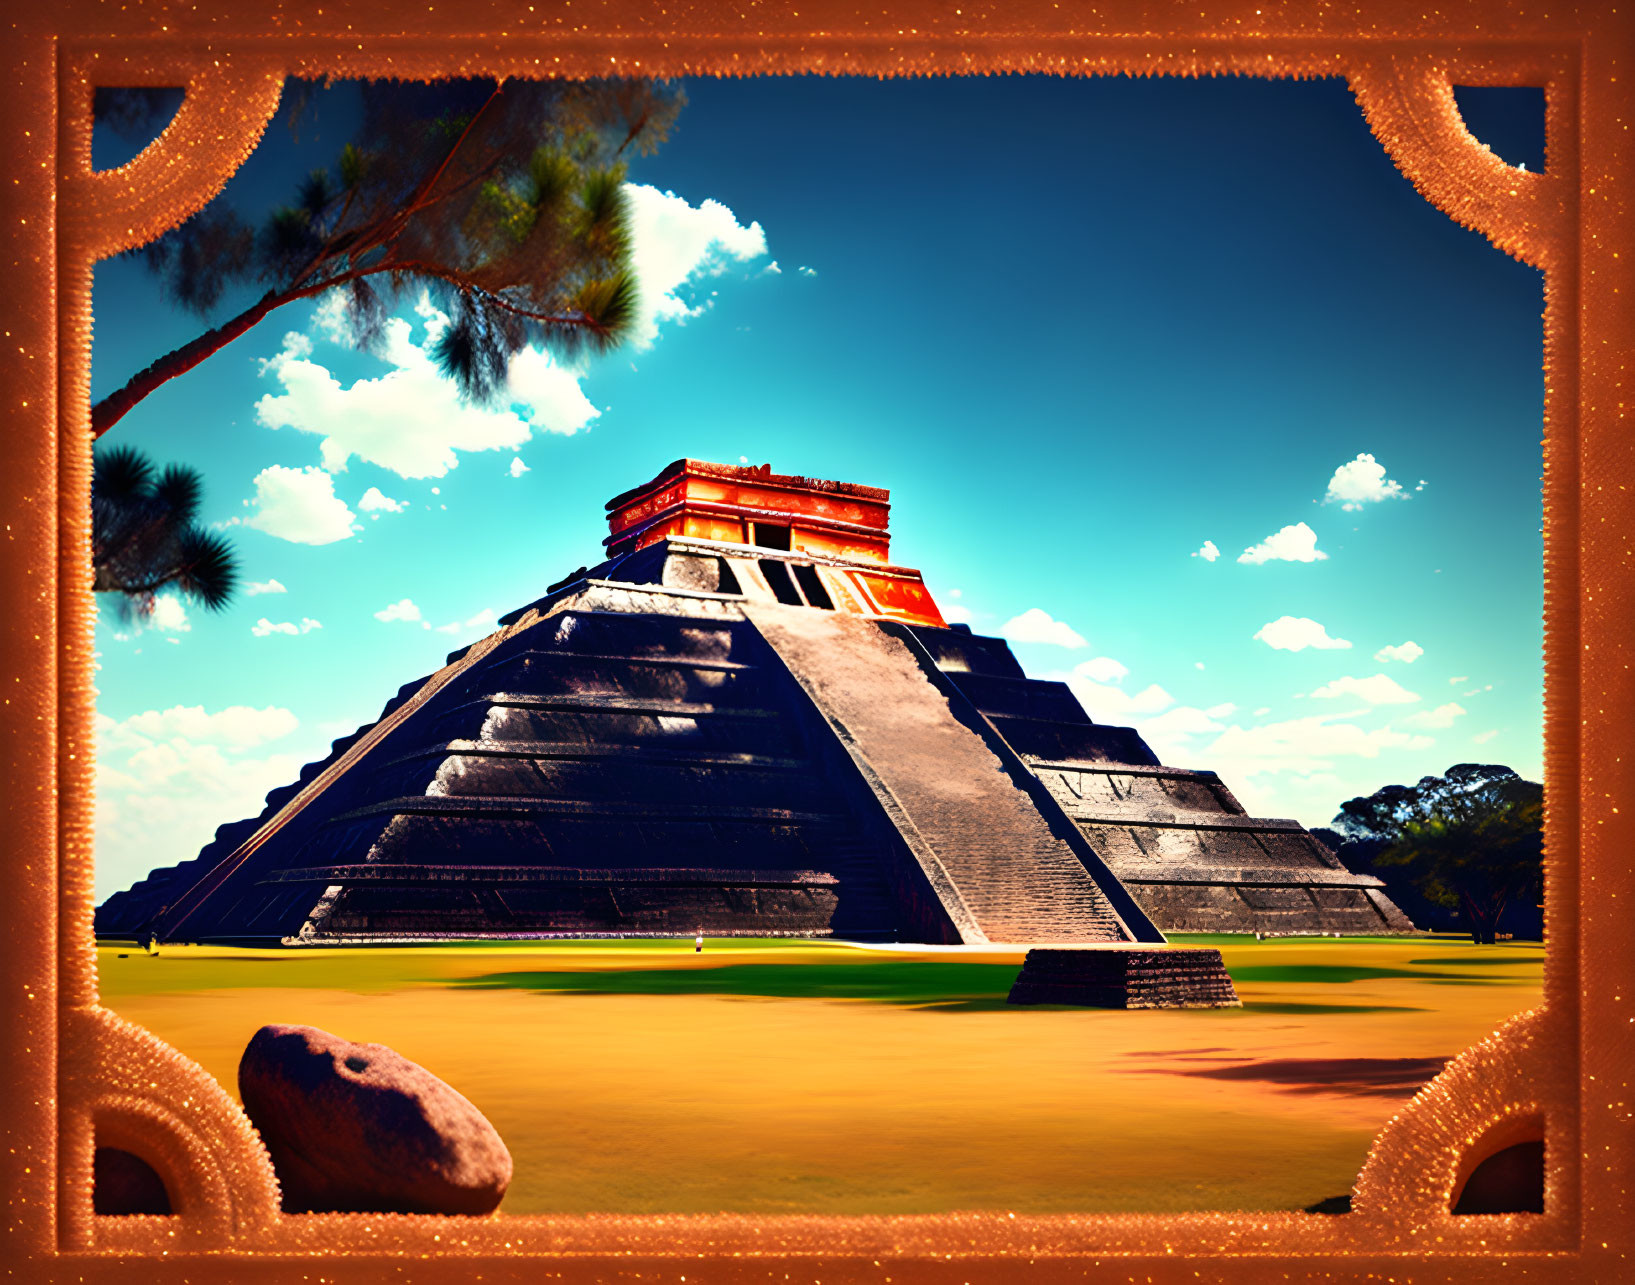 Mesoamerican pyramid with red top under clear blue sky and ornate border